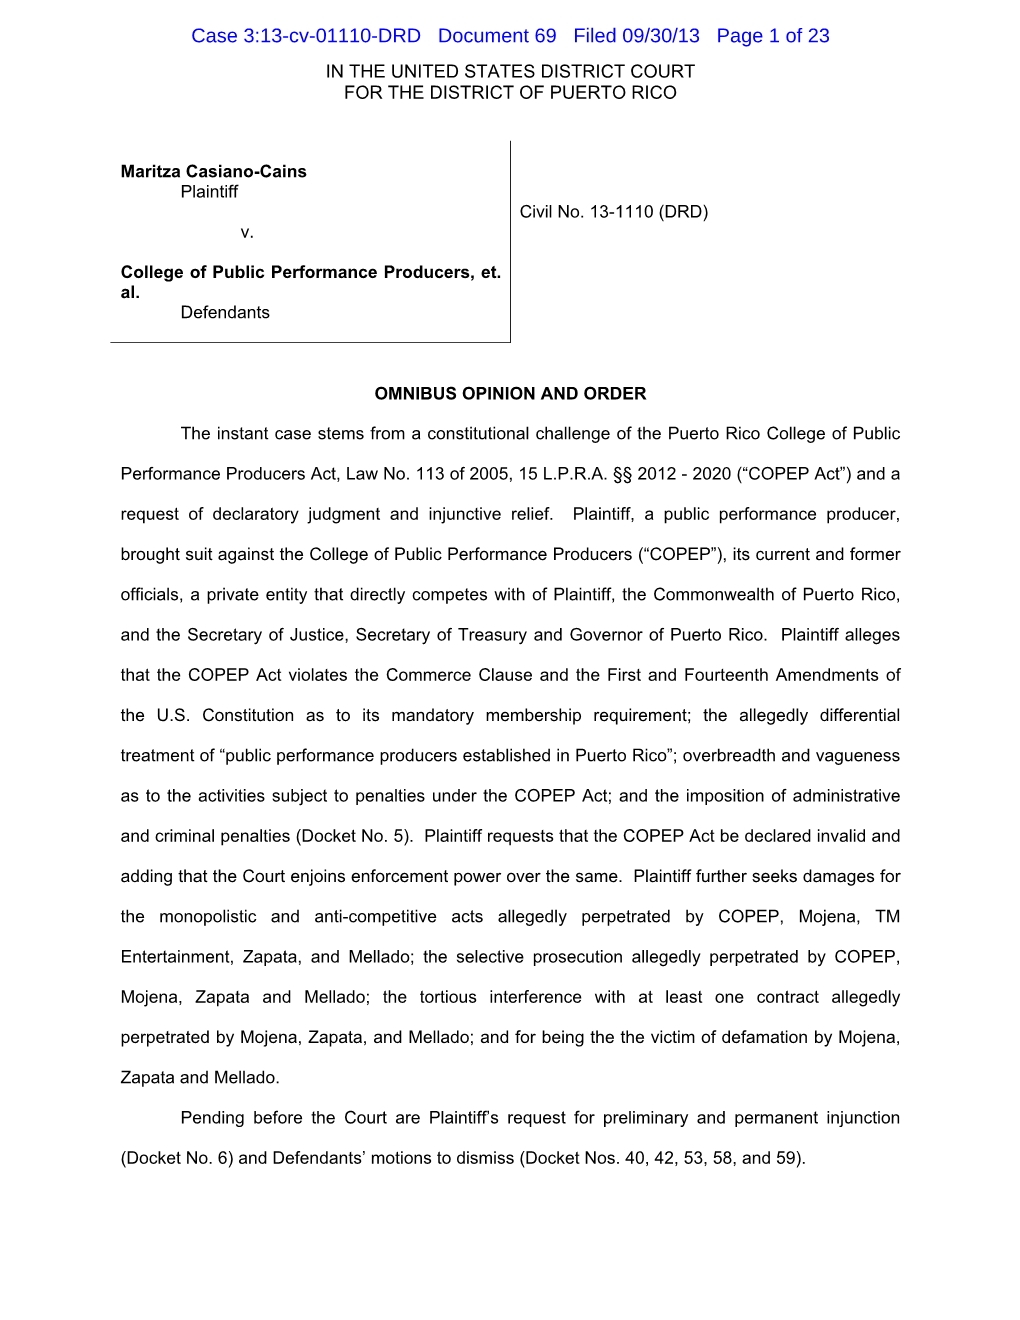 Case 3:13-Cv-01110-DRD Document 69 Filed 09/30/13 Page 1 of 23 in the UNITED STATES DISTRICT COURT for the DISTRICT of PUERTO RICO